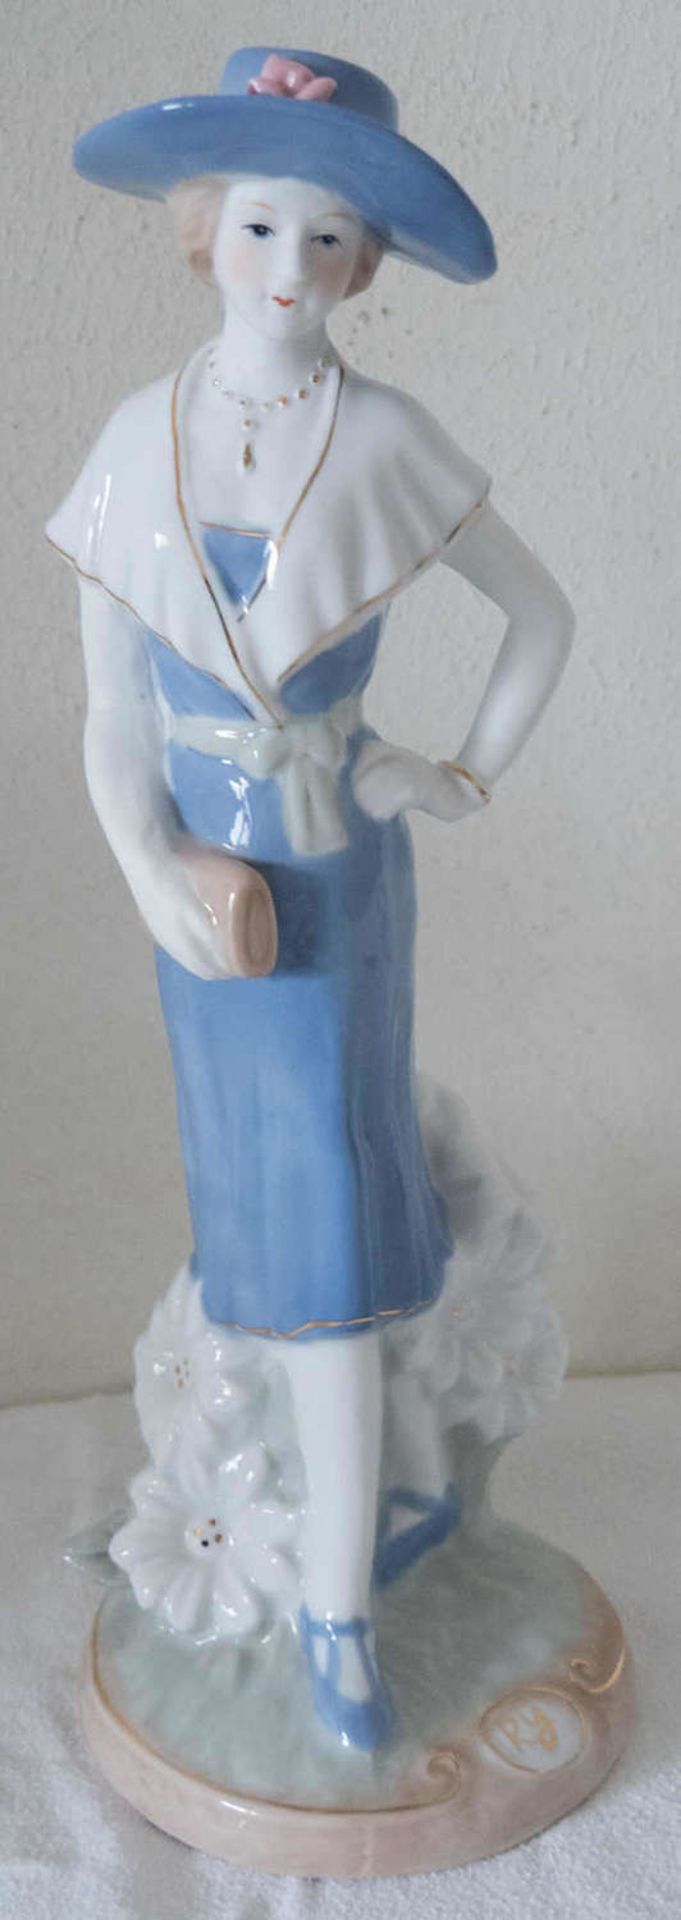 Porcelain figurine "Elegant lady, polychrome Height: about 31 cm At the stand" RY ".